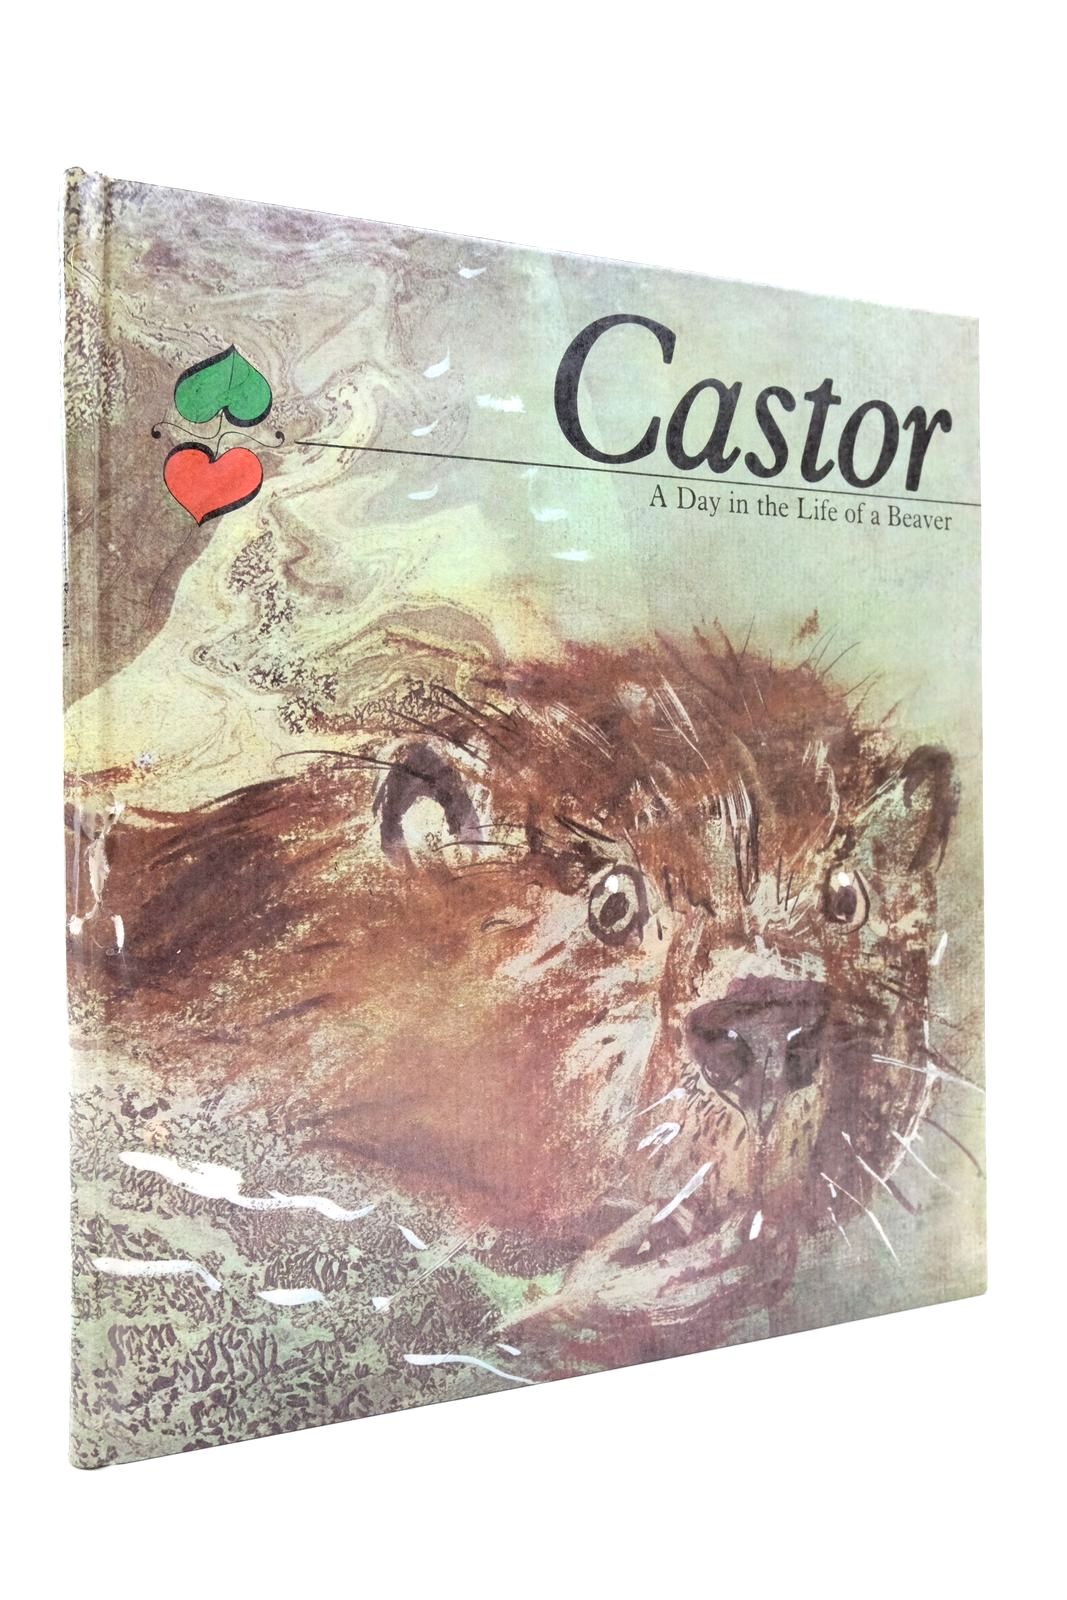 Photo of CASTOR: A DAY IN THE LIFE OF A BEAVER written by Raedel, Margit
Sadler, Richard illustrated by Lahr, Gerhard published by Wrens Park Publishing (STOCK CODE: 2138634)  for sale by Stella & Rose's Books